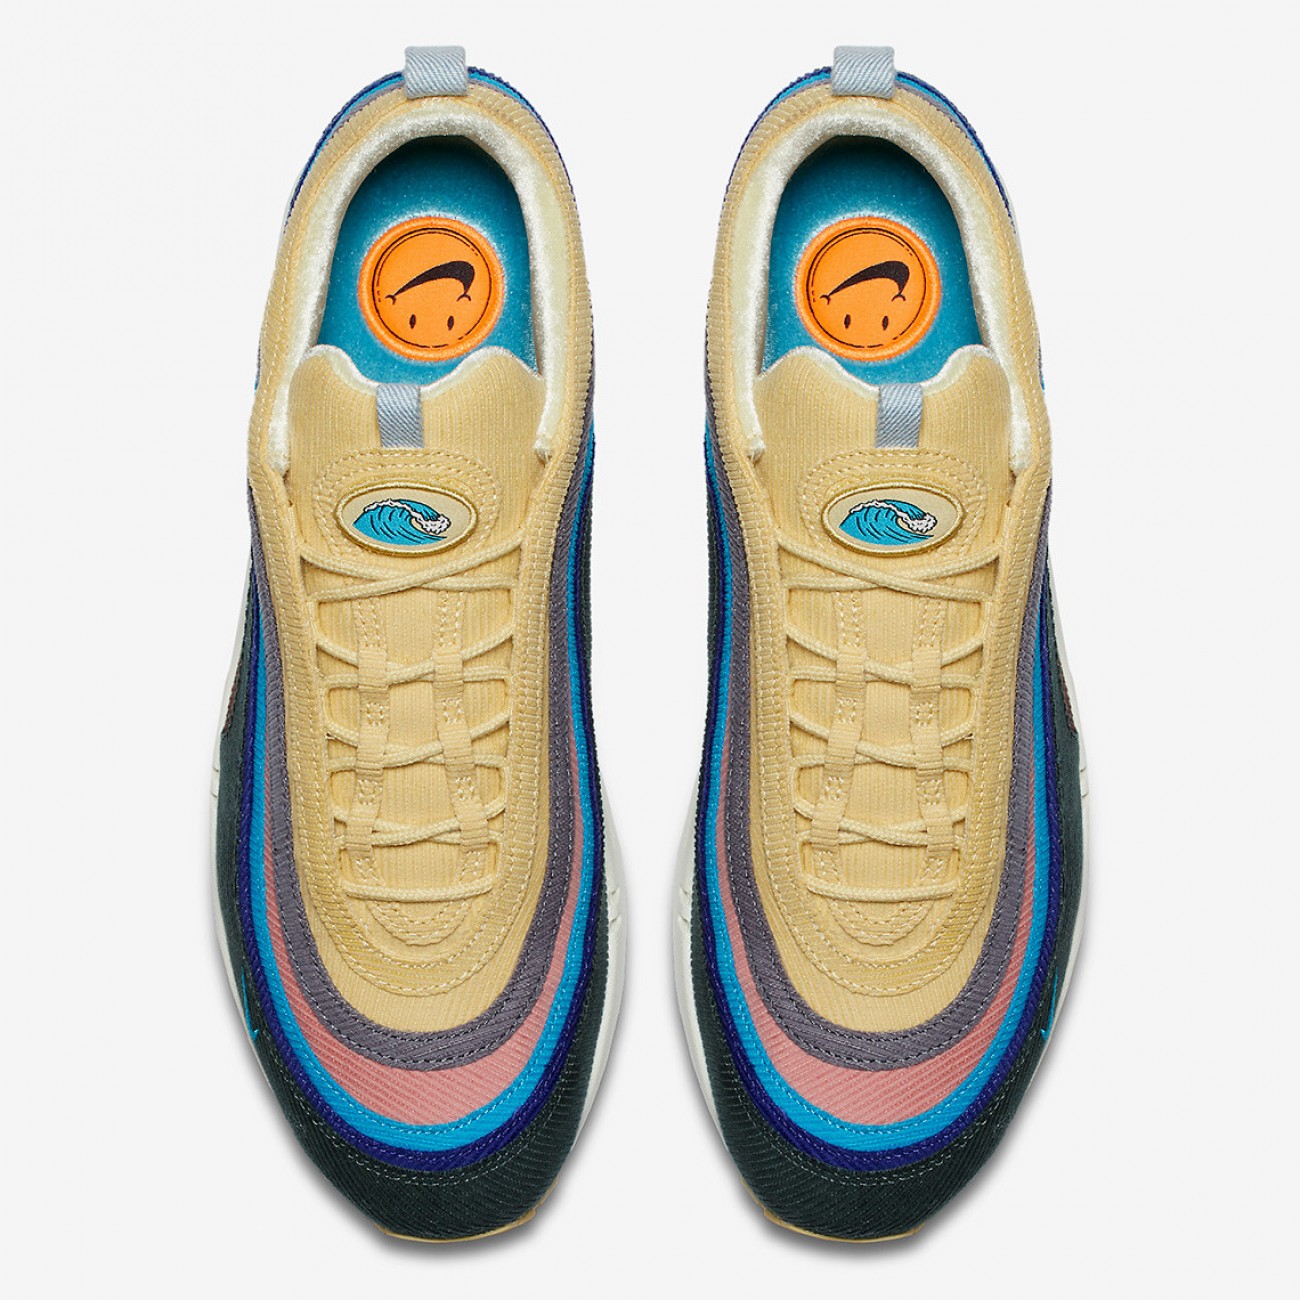 Nike Air Max 1/97 VF SW "Sean Wotherspoon" For Sale Release Date AJ4219-400